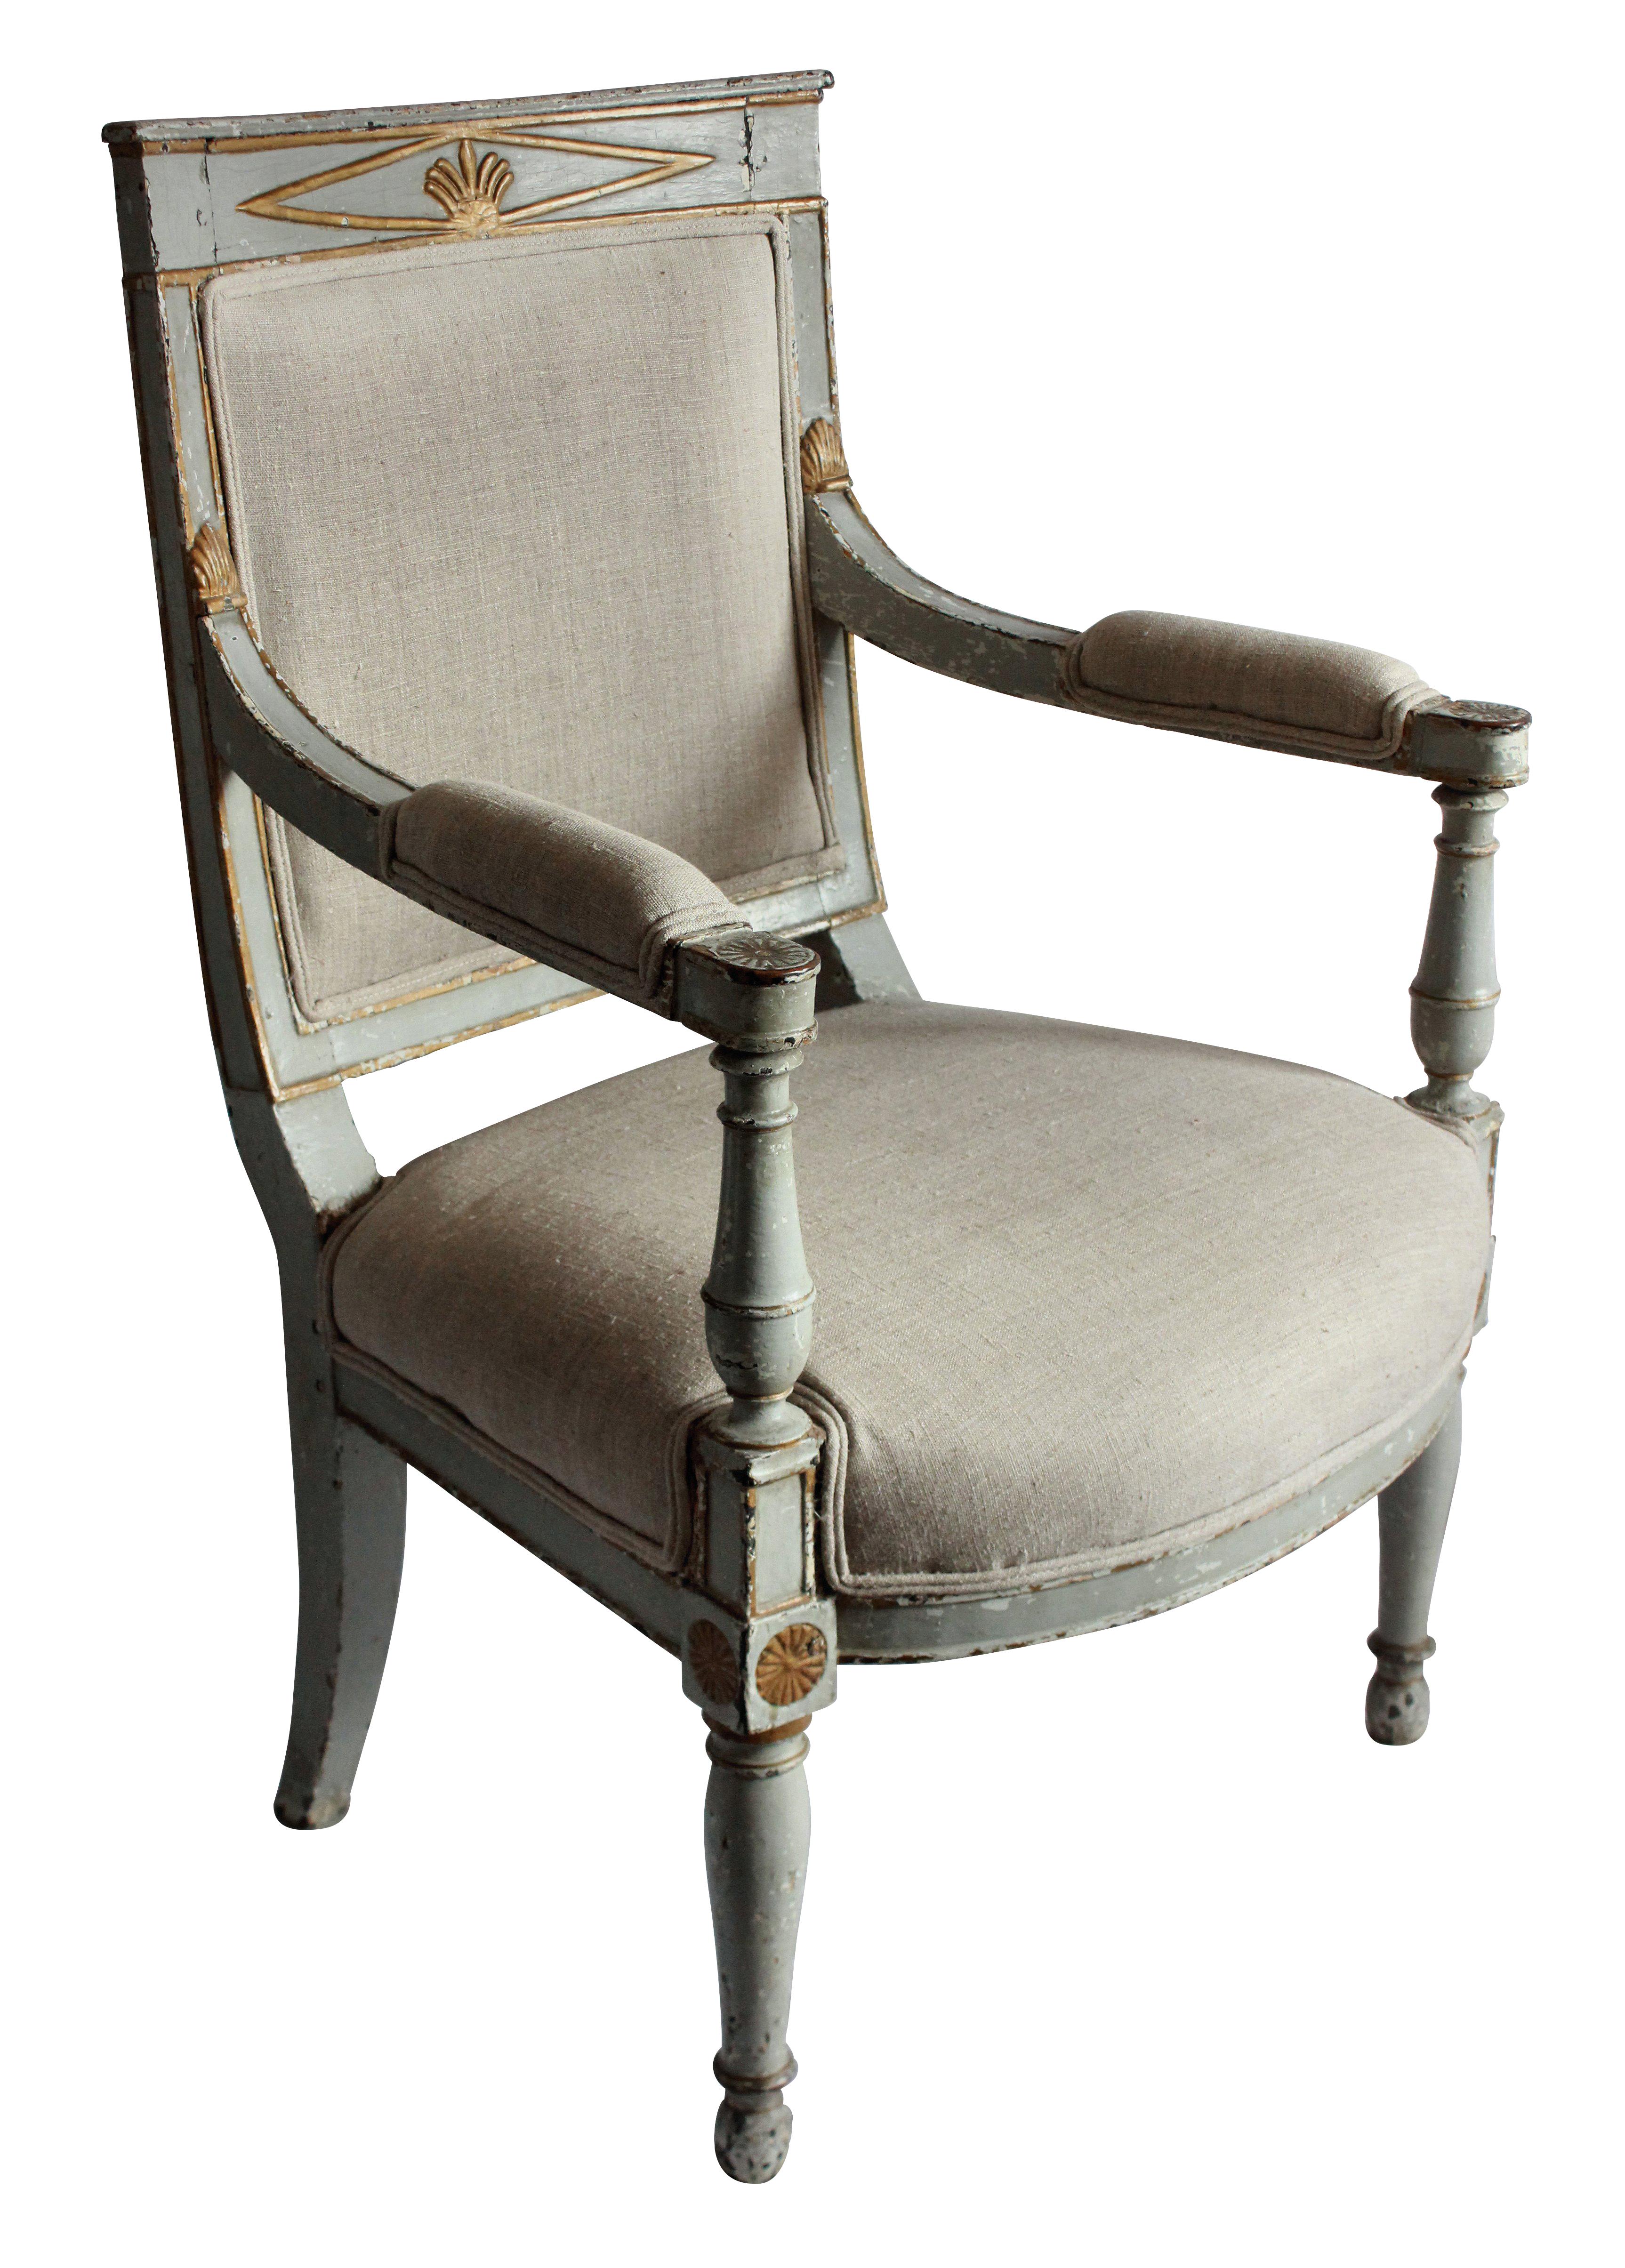 An early 19th century Swedish desk chair with original paints in a duck egg grey. Upholstered in linen and horse hair.